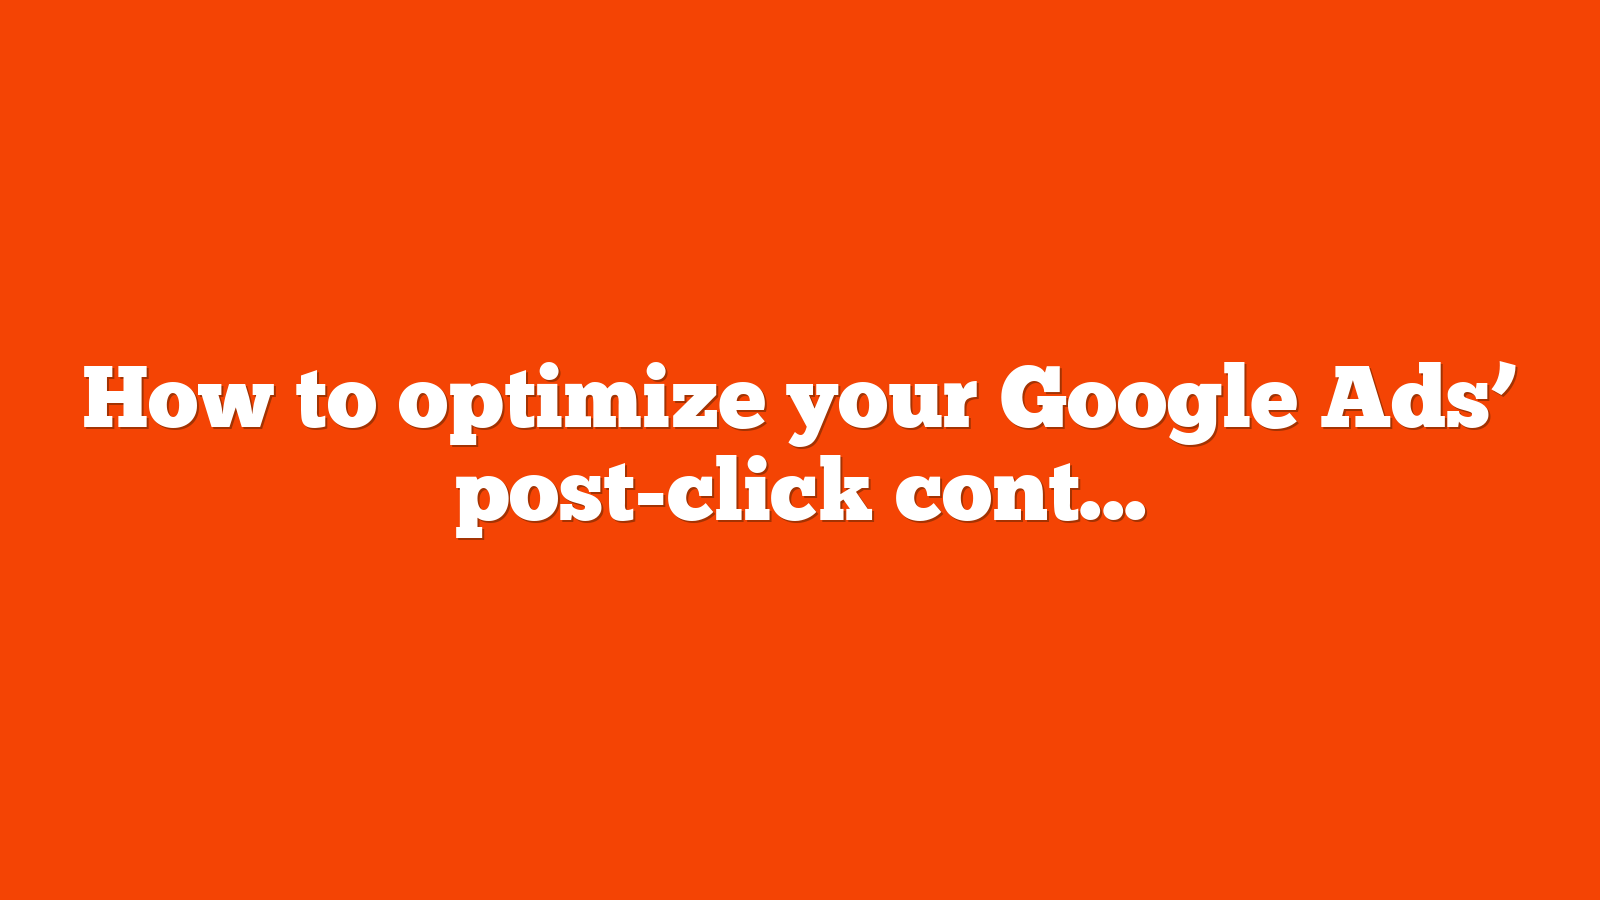 How to optimize your Google Ads post click content